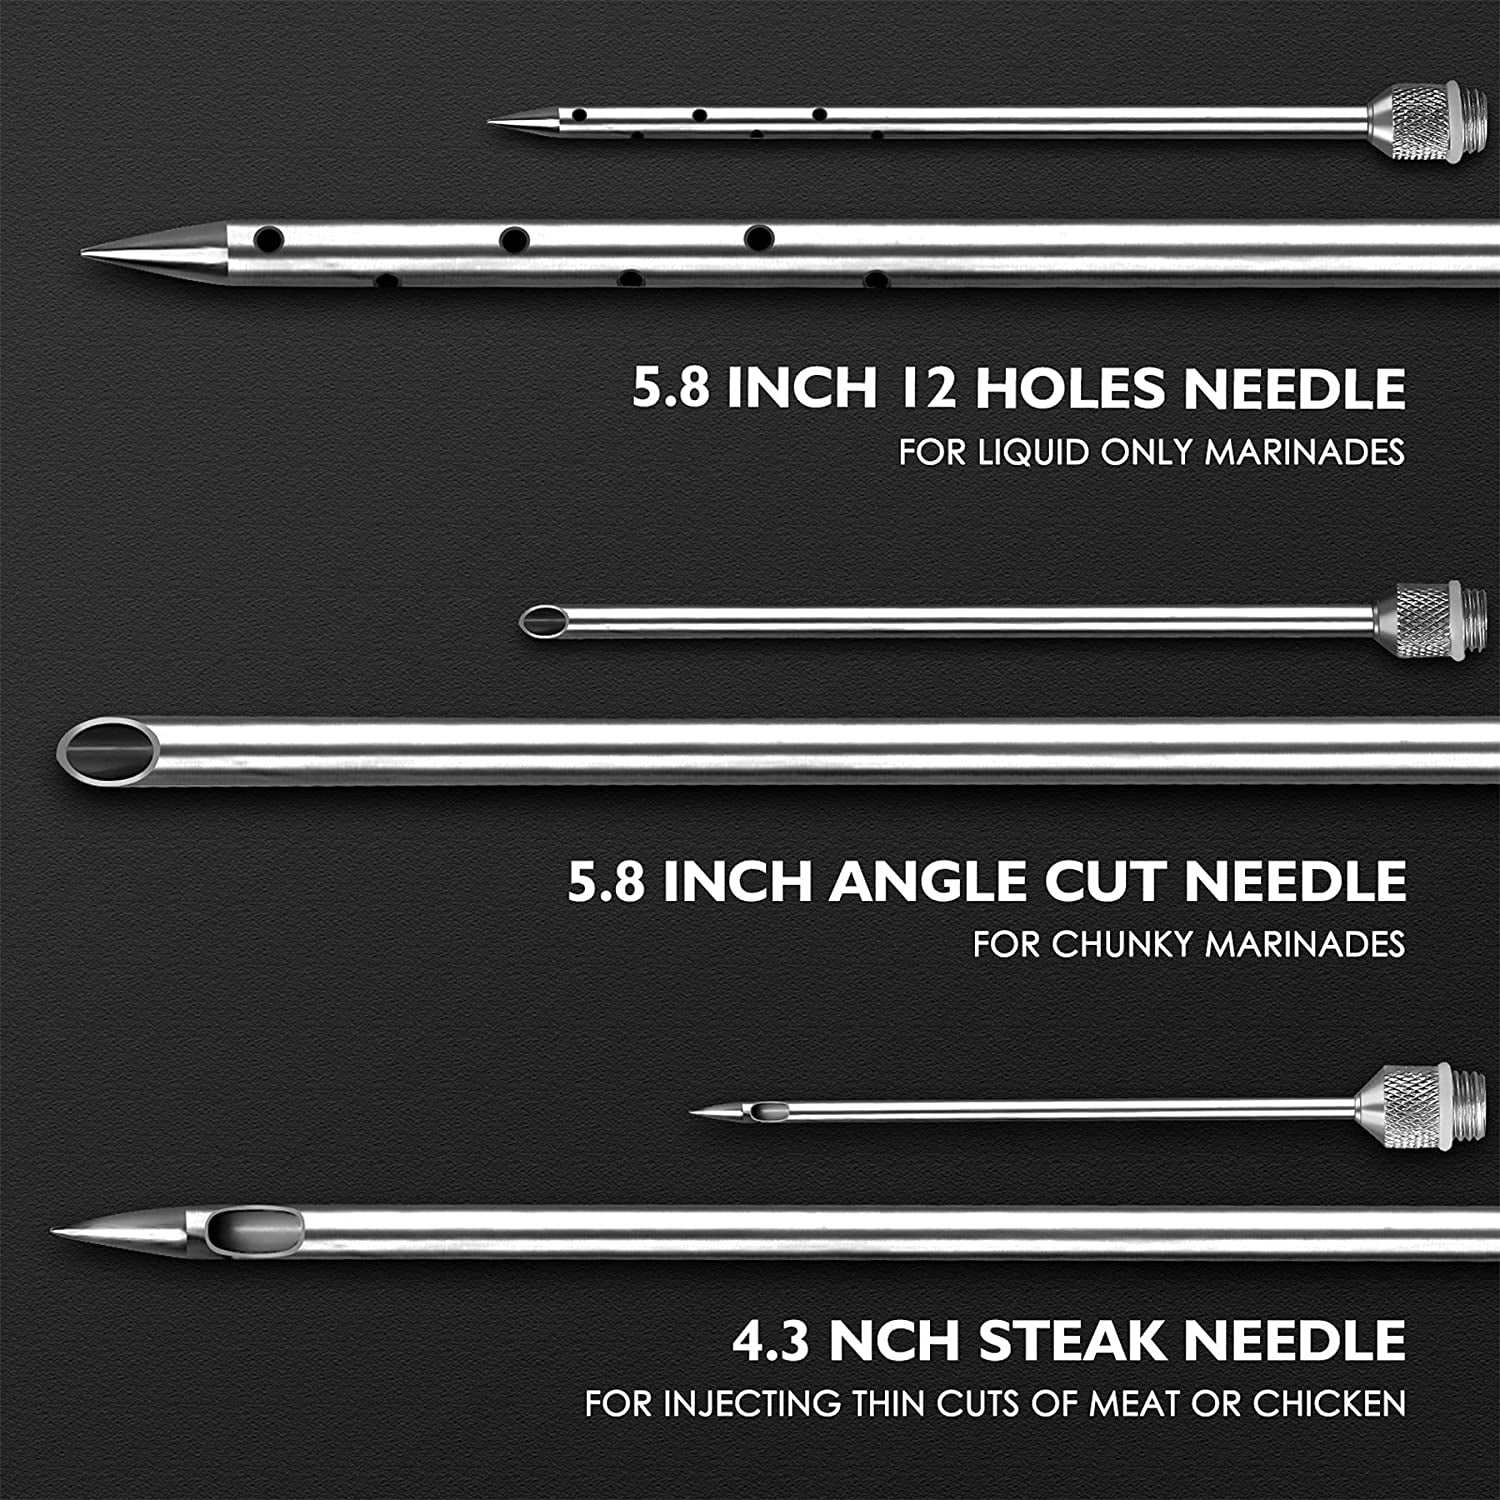 Meat Injector, Stainless Steel Marinade Injector Syringe for BBQ Grill and Turkey, 2 Ounce Syringe with 3 Needles, Easy to Use and Clean